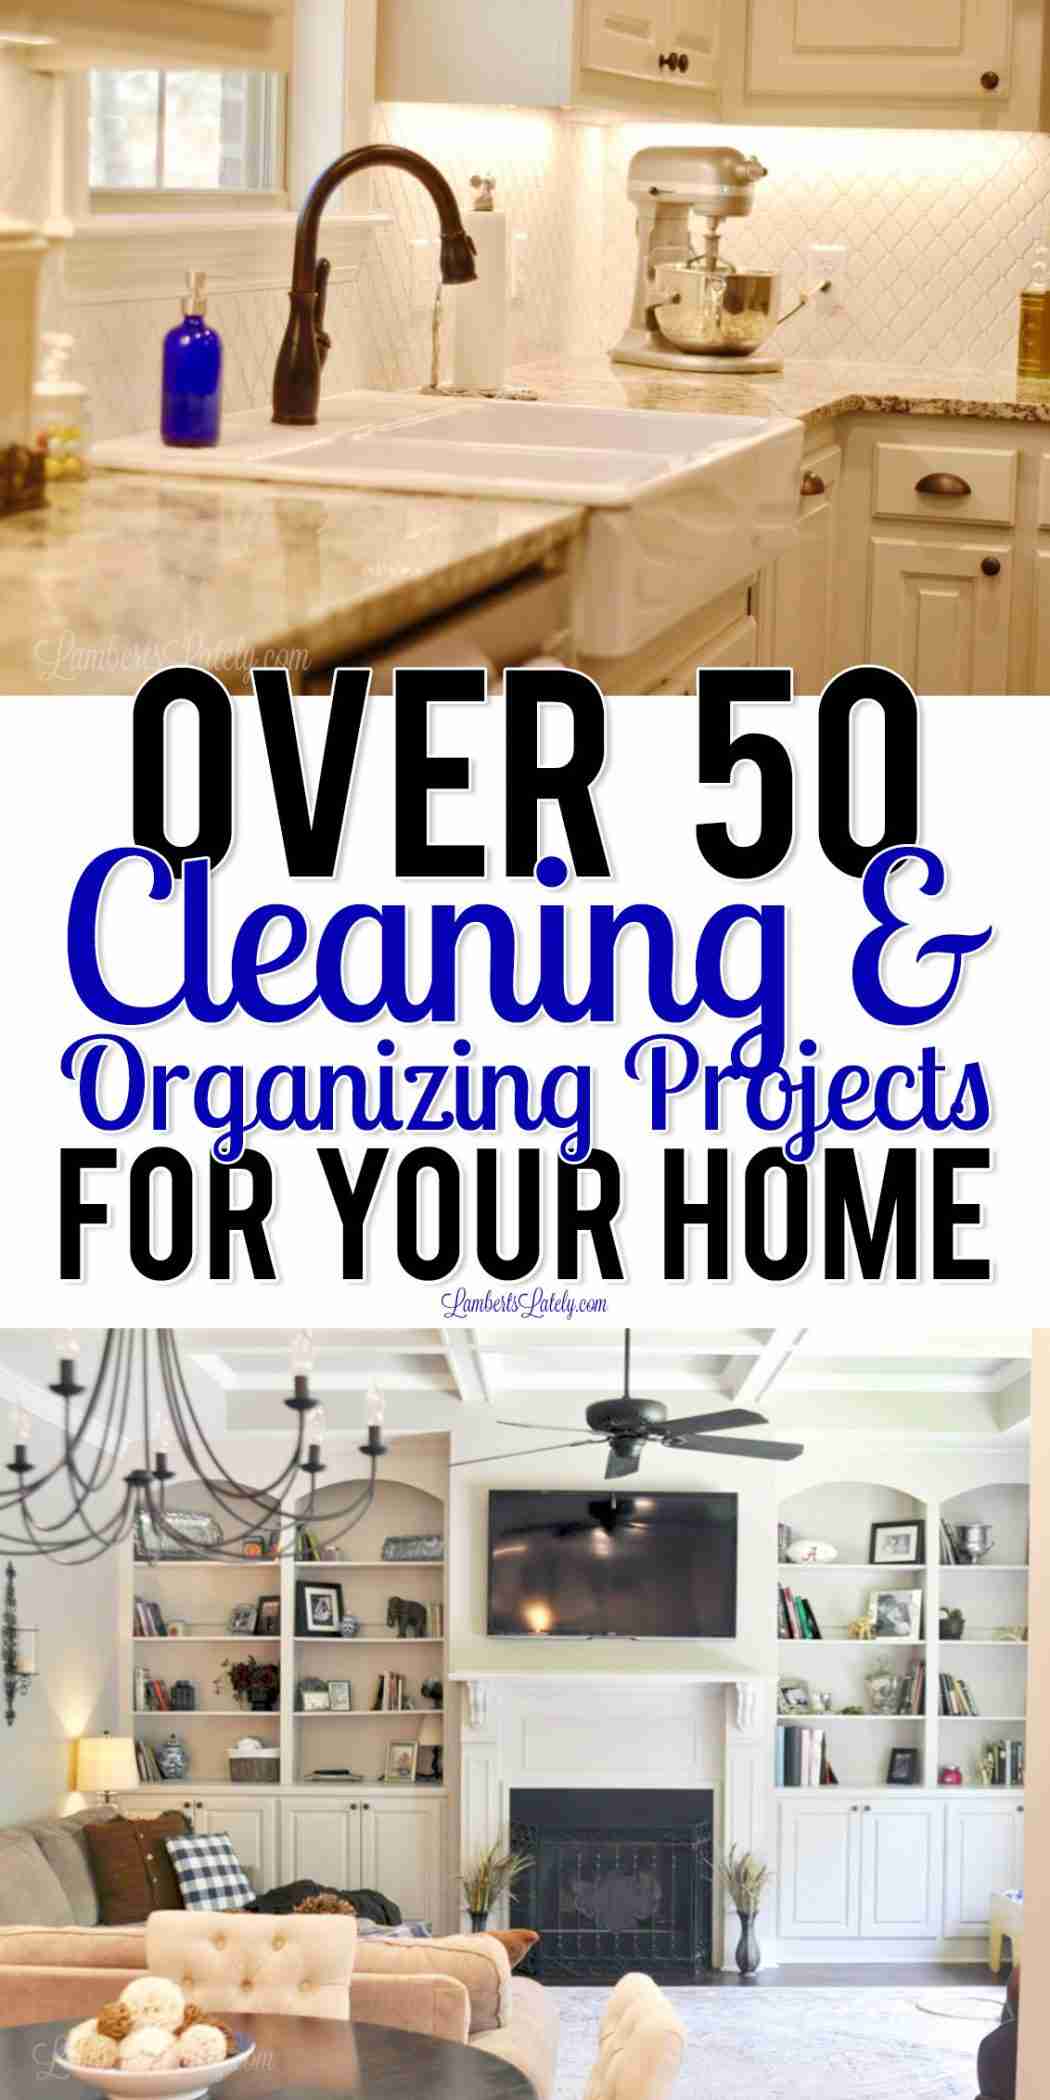 This list of over 50 home cleaning projects will help you organize and deep clean while you're stuck in your house. It's even broken down by room (kitchen, bedroom, etc.).